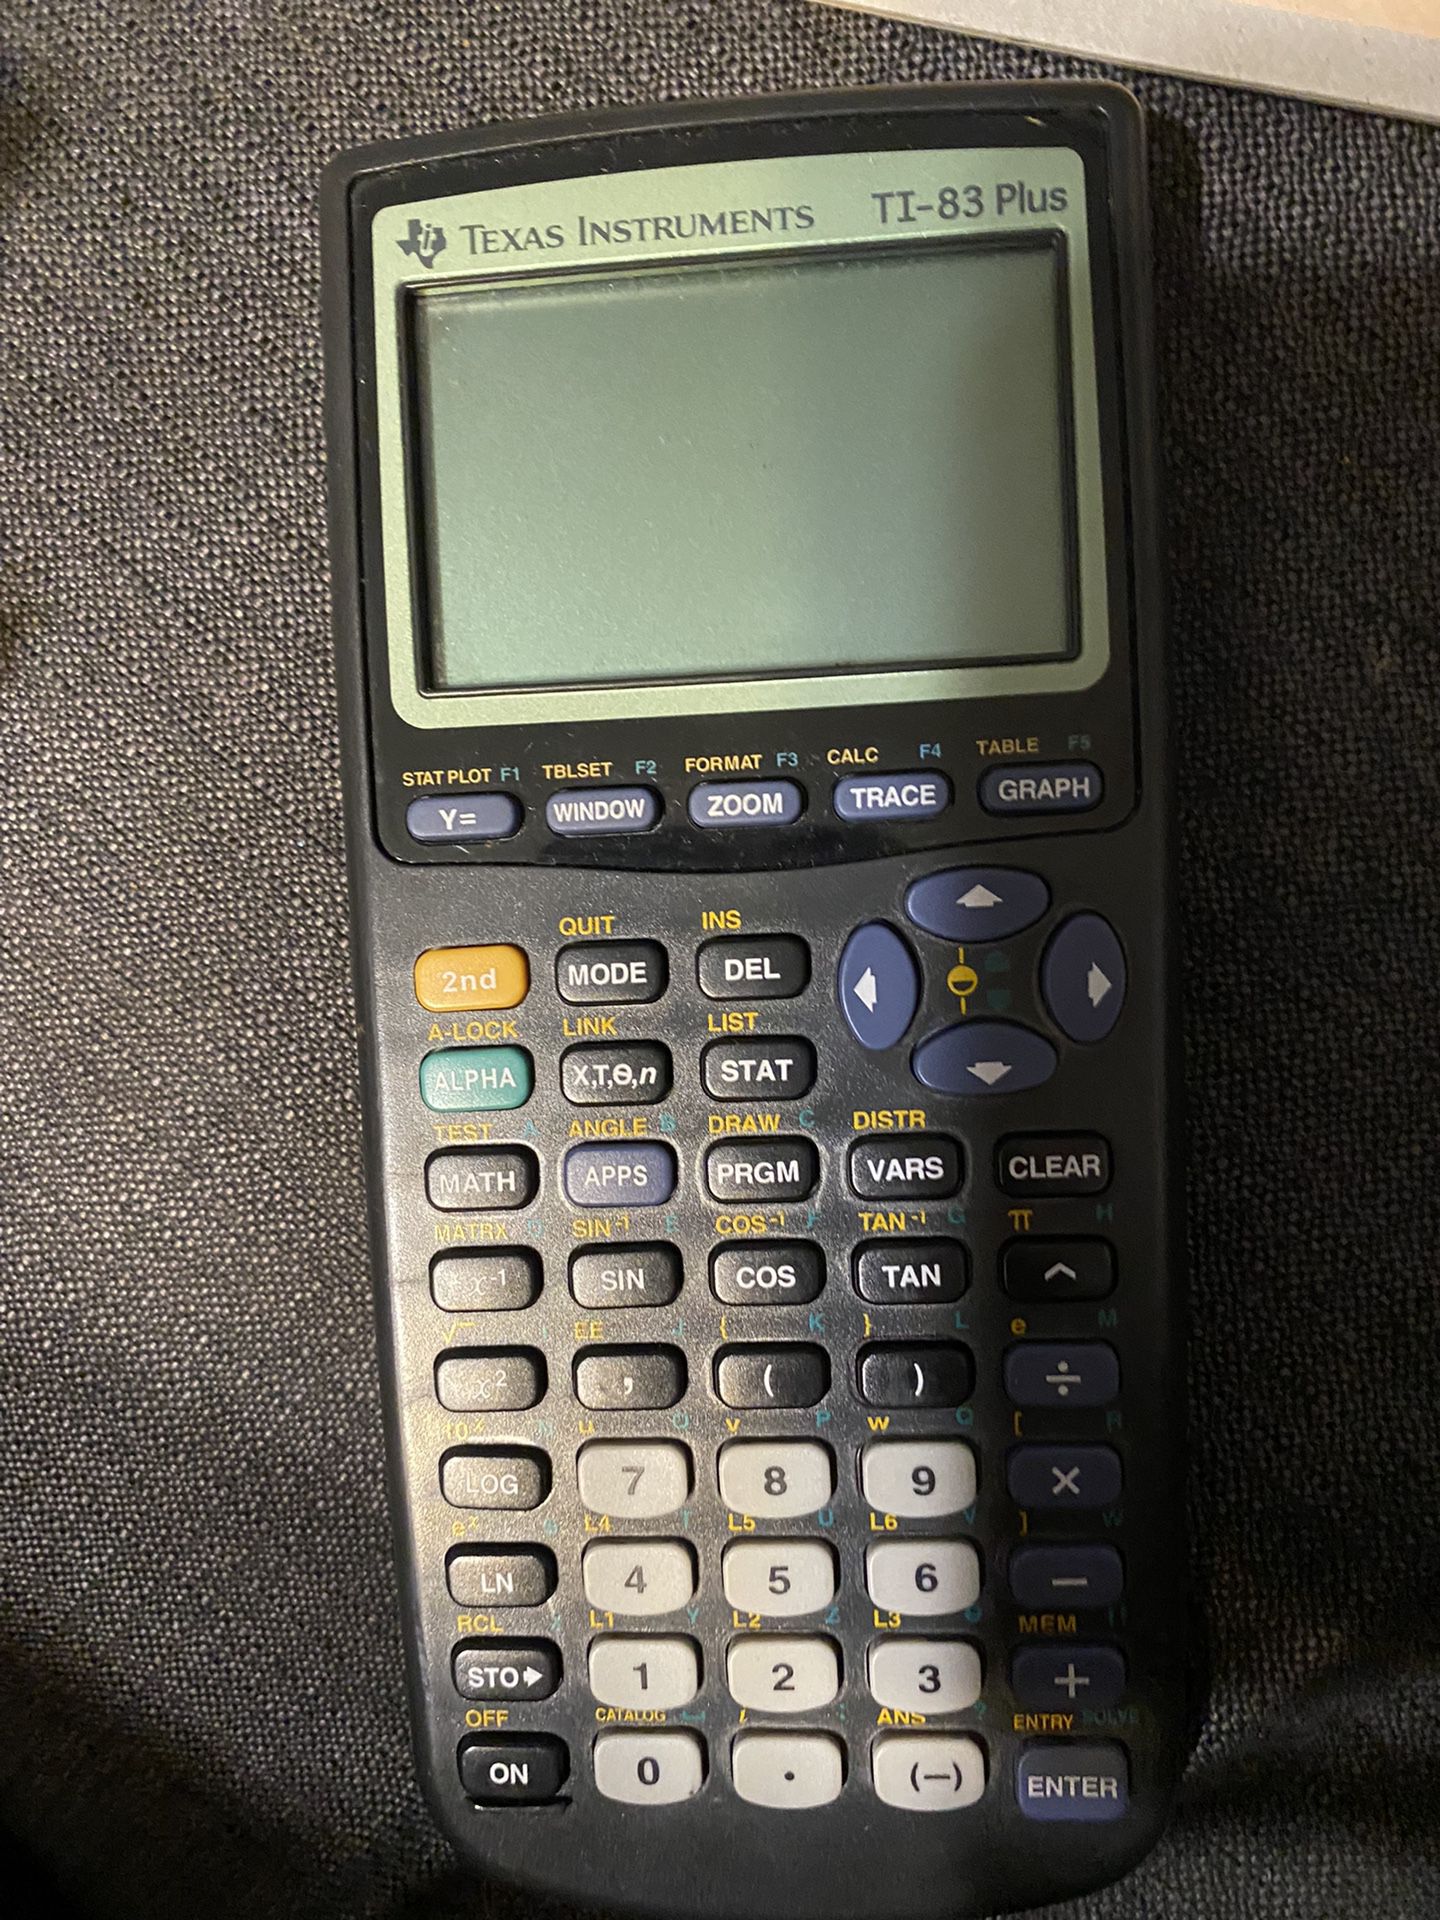 Texas Instruments Graphing Calculator TI-83